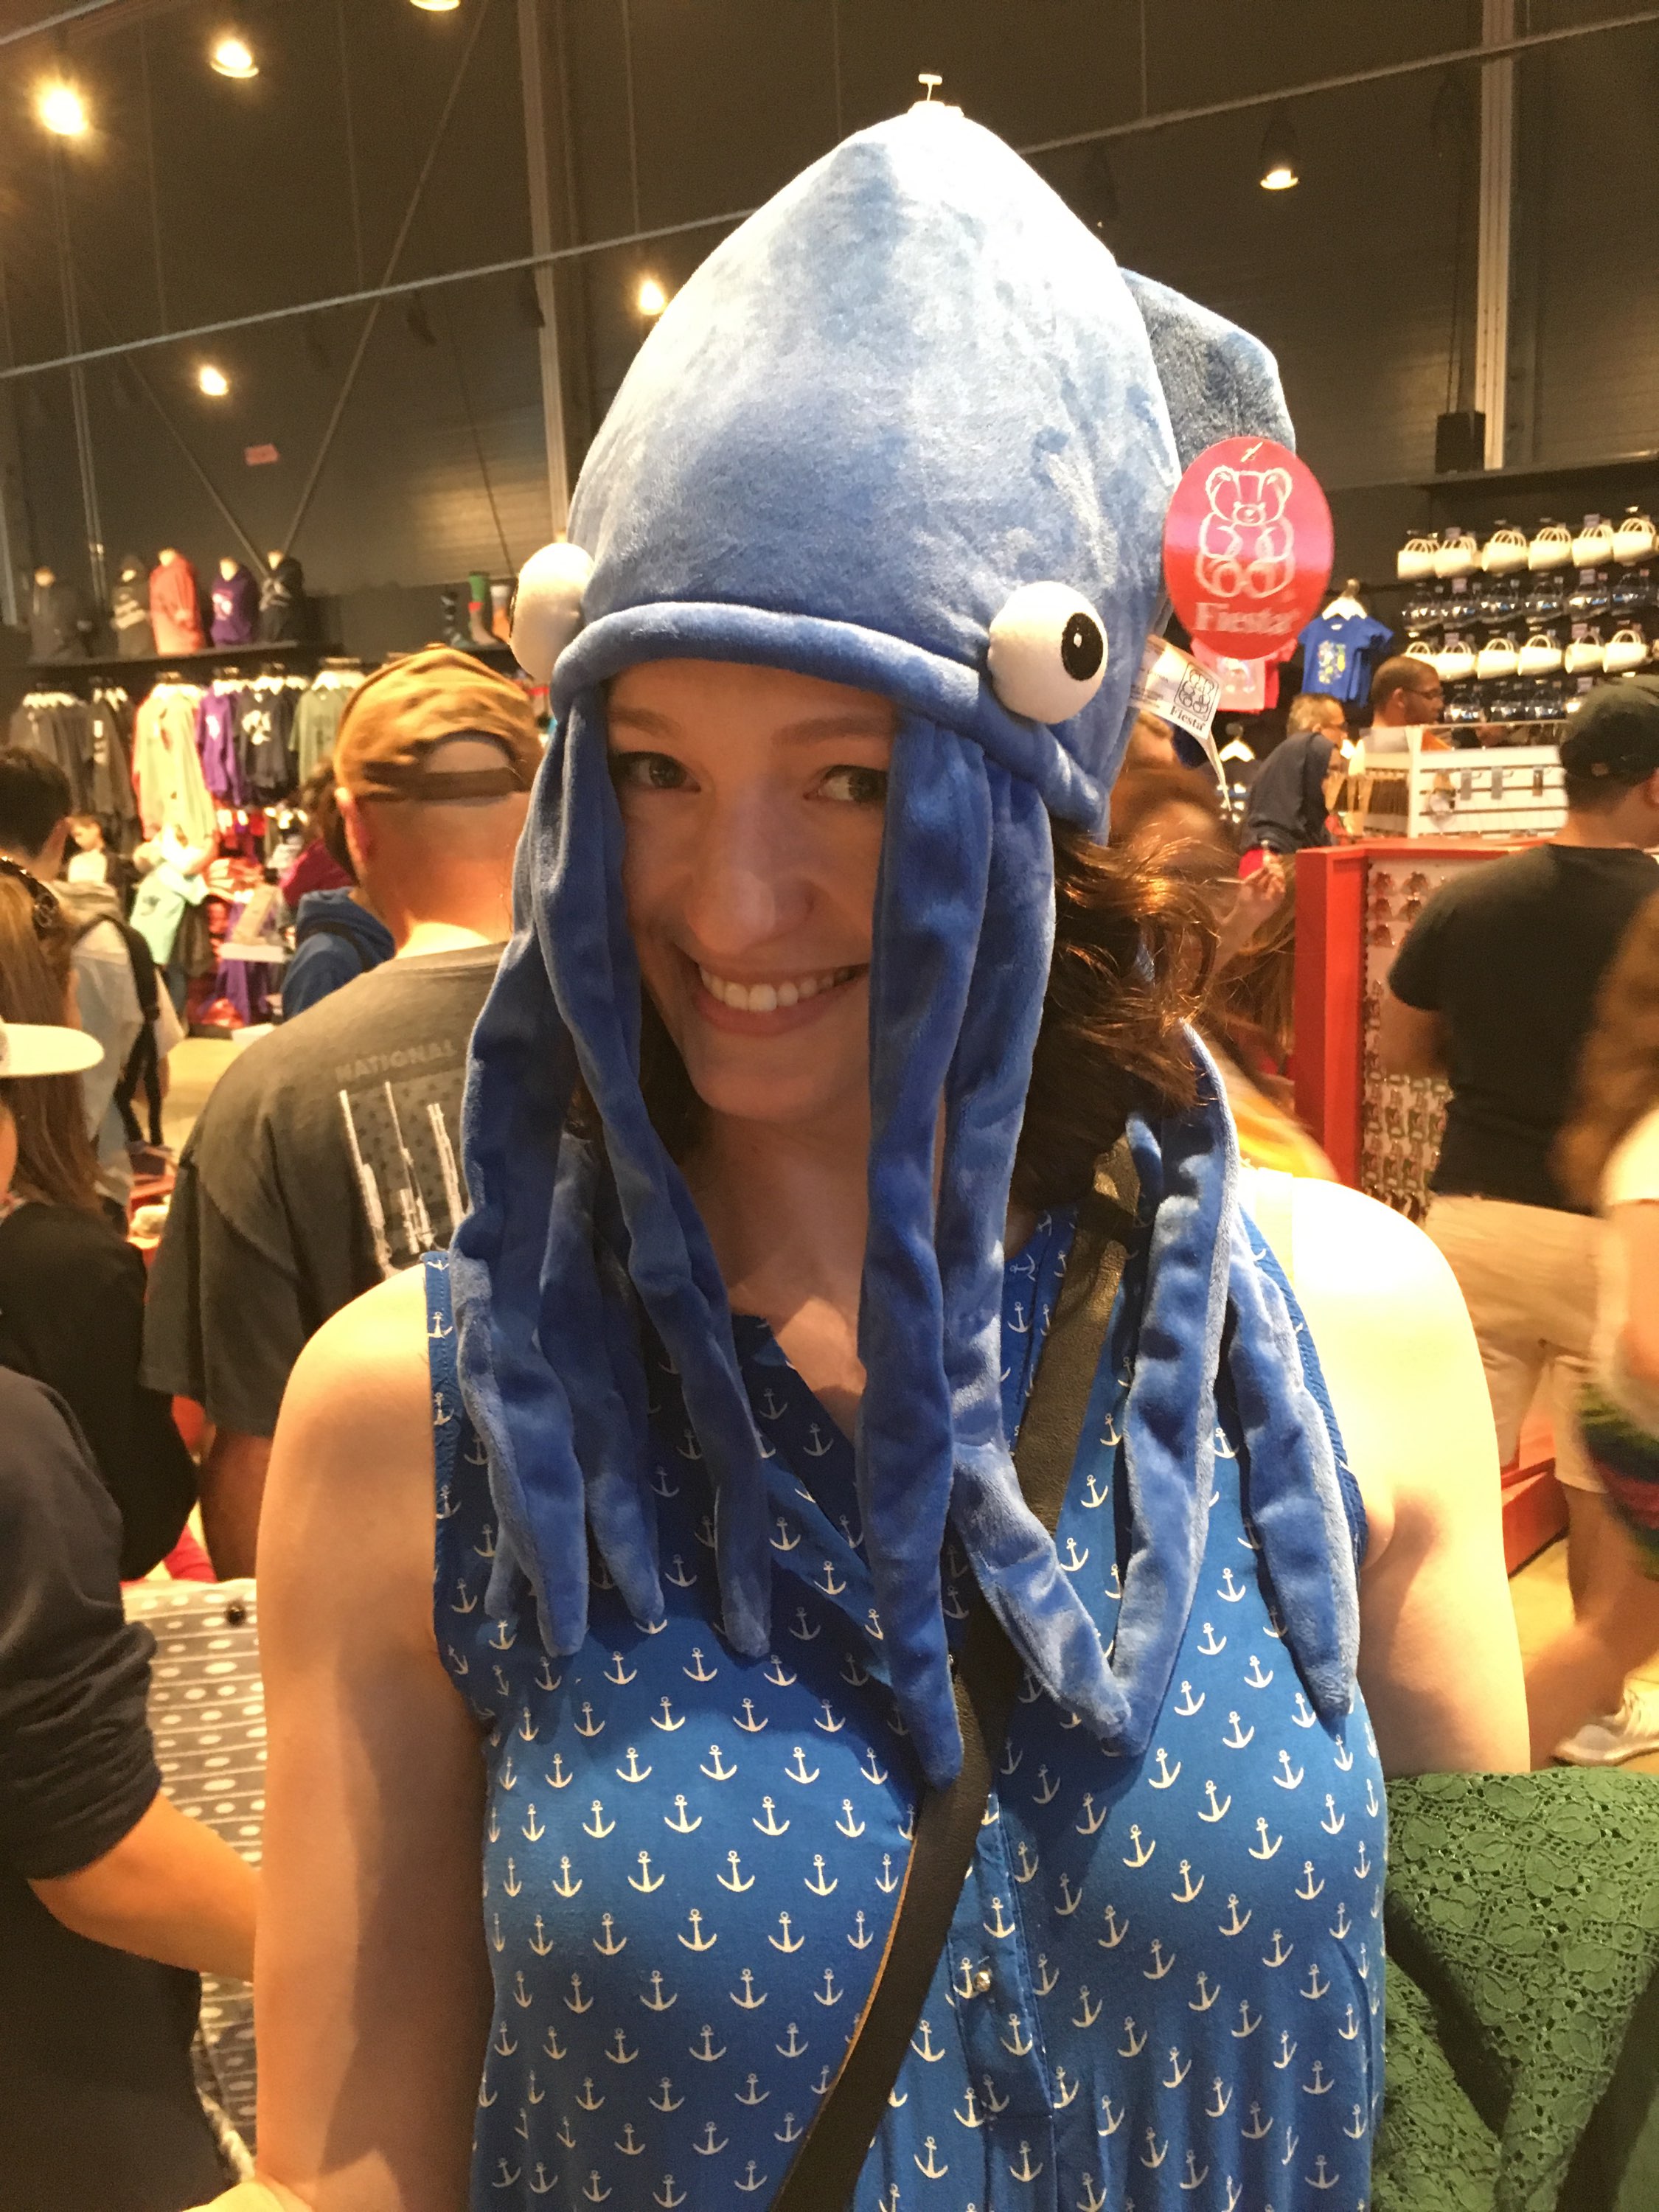 Katherine wearing a fabulous squid hat and rocking it